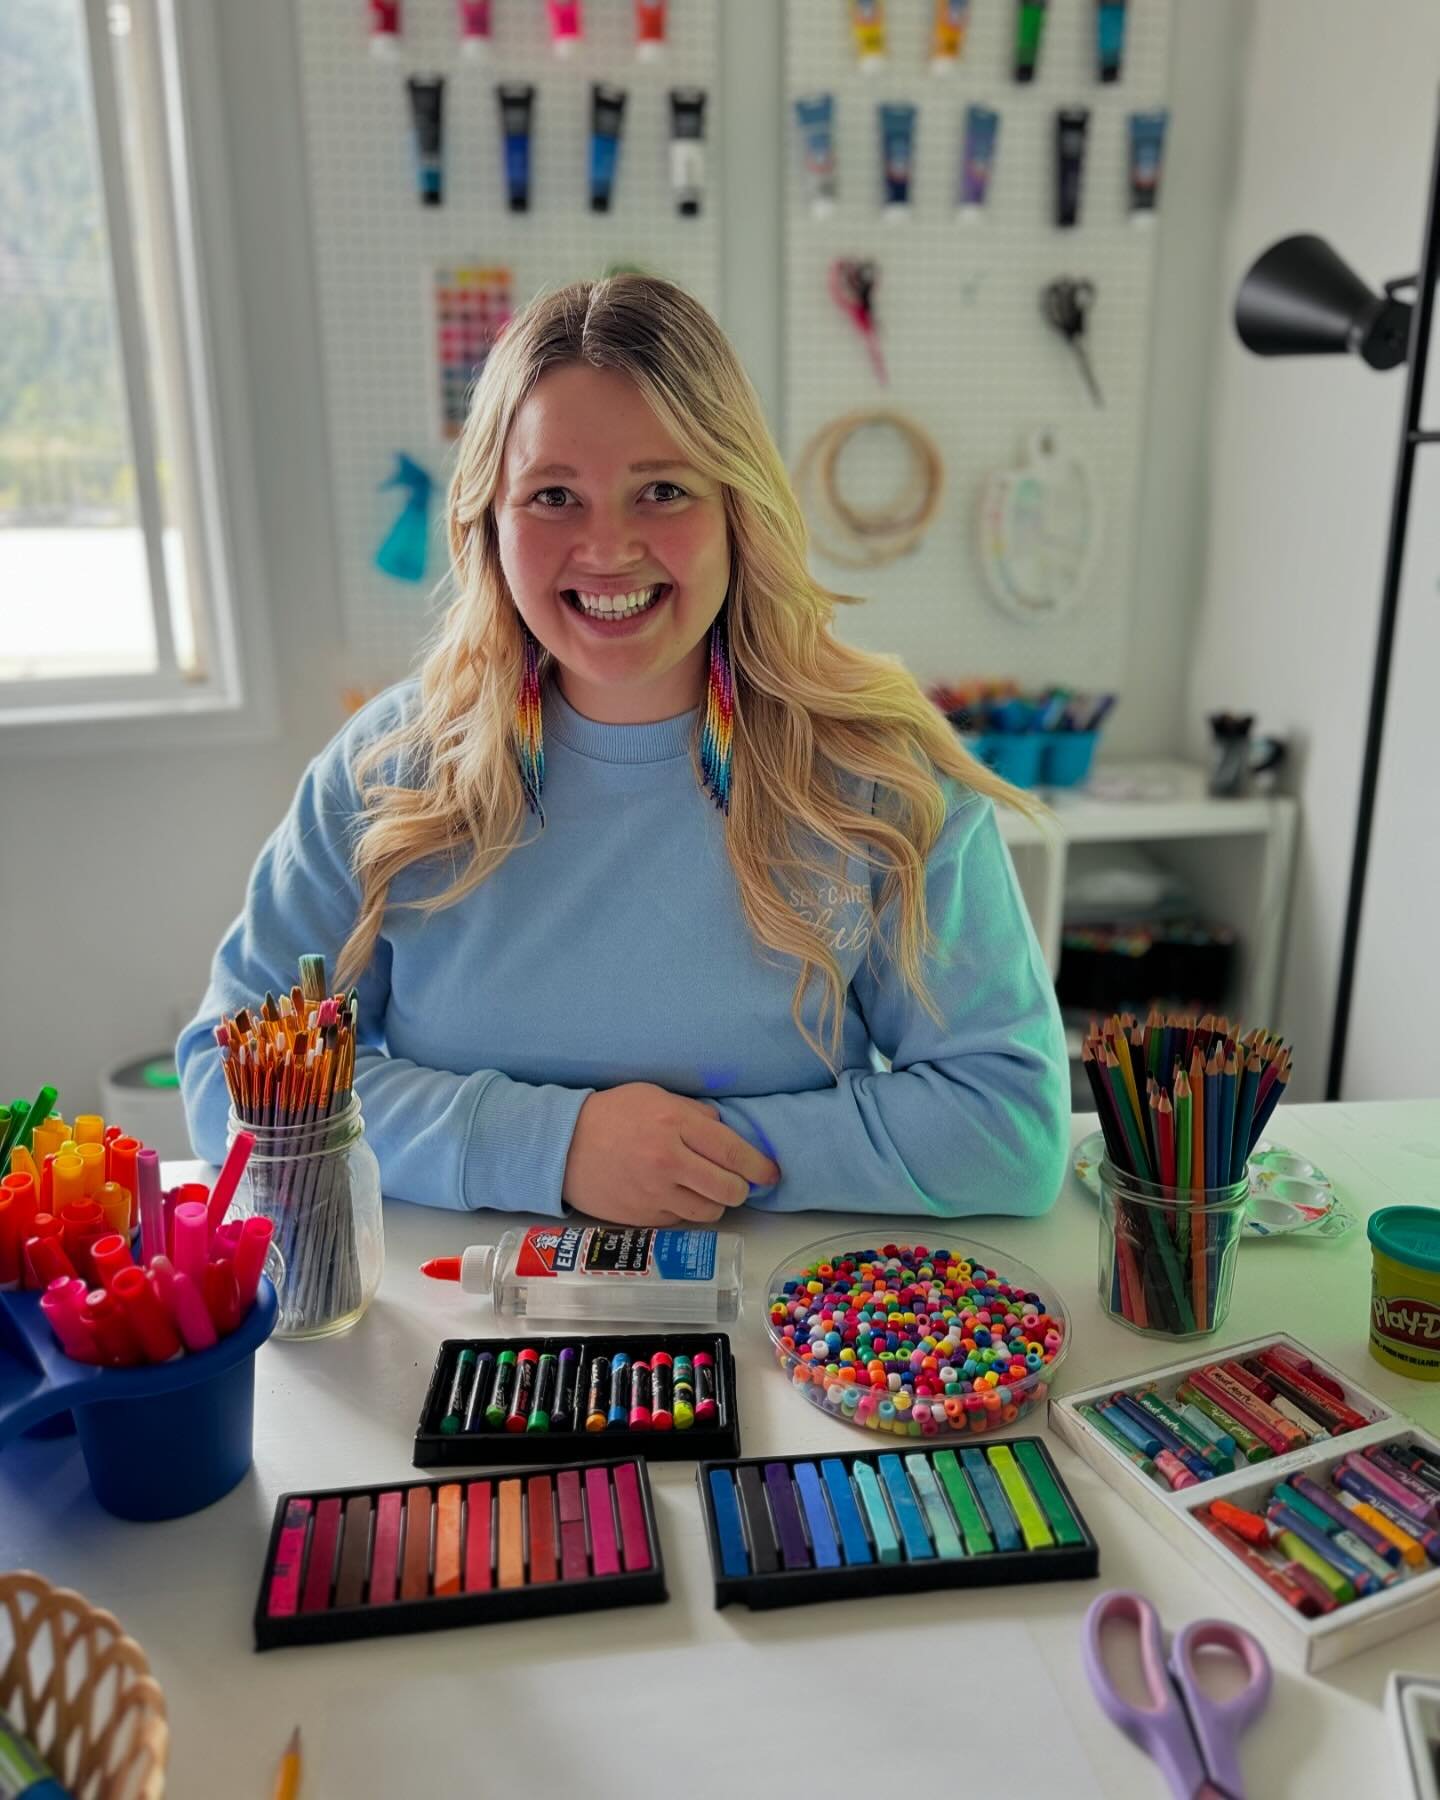 As much as the flowers have been blooming this spring, so has my dream of my own studio office! 🎨

This was not an overnight transition, it was actually many years in the making. But it happened quite fast once I committed to the journey.

&ldquo;A 